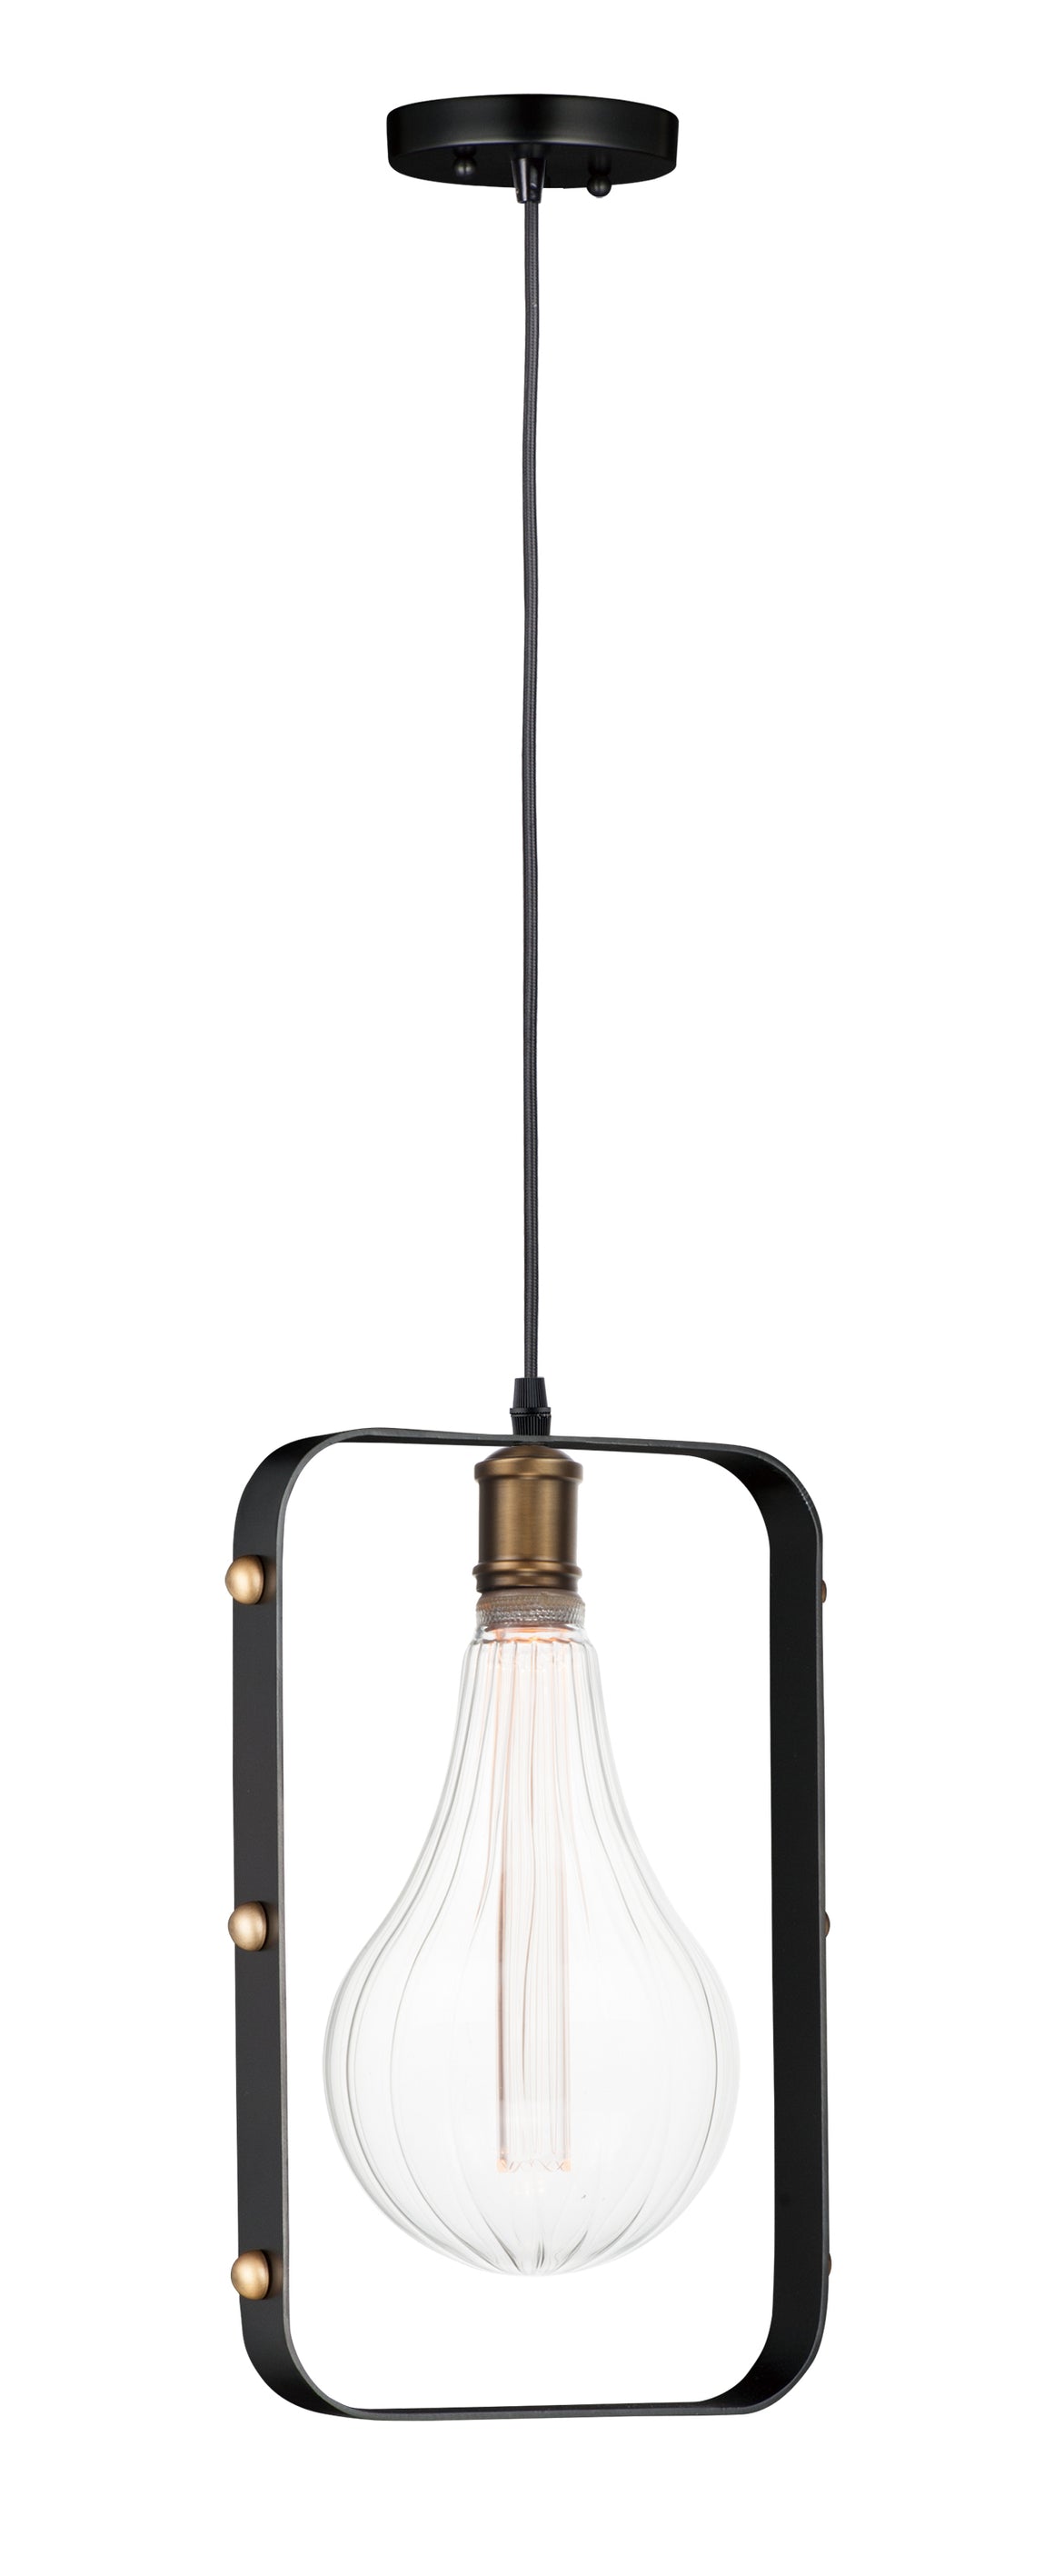 Early Electric 1-Light Pendant with A52 LED Bulb